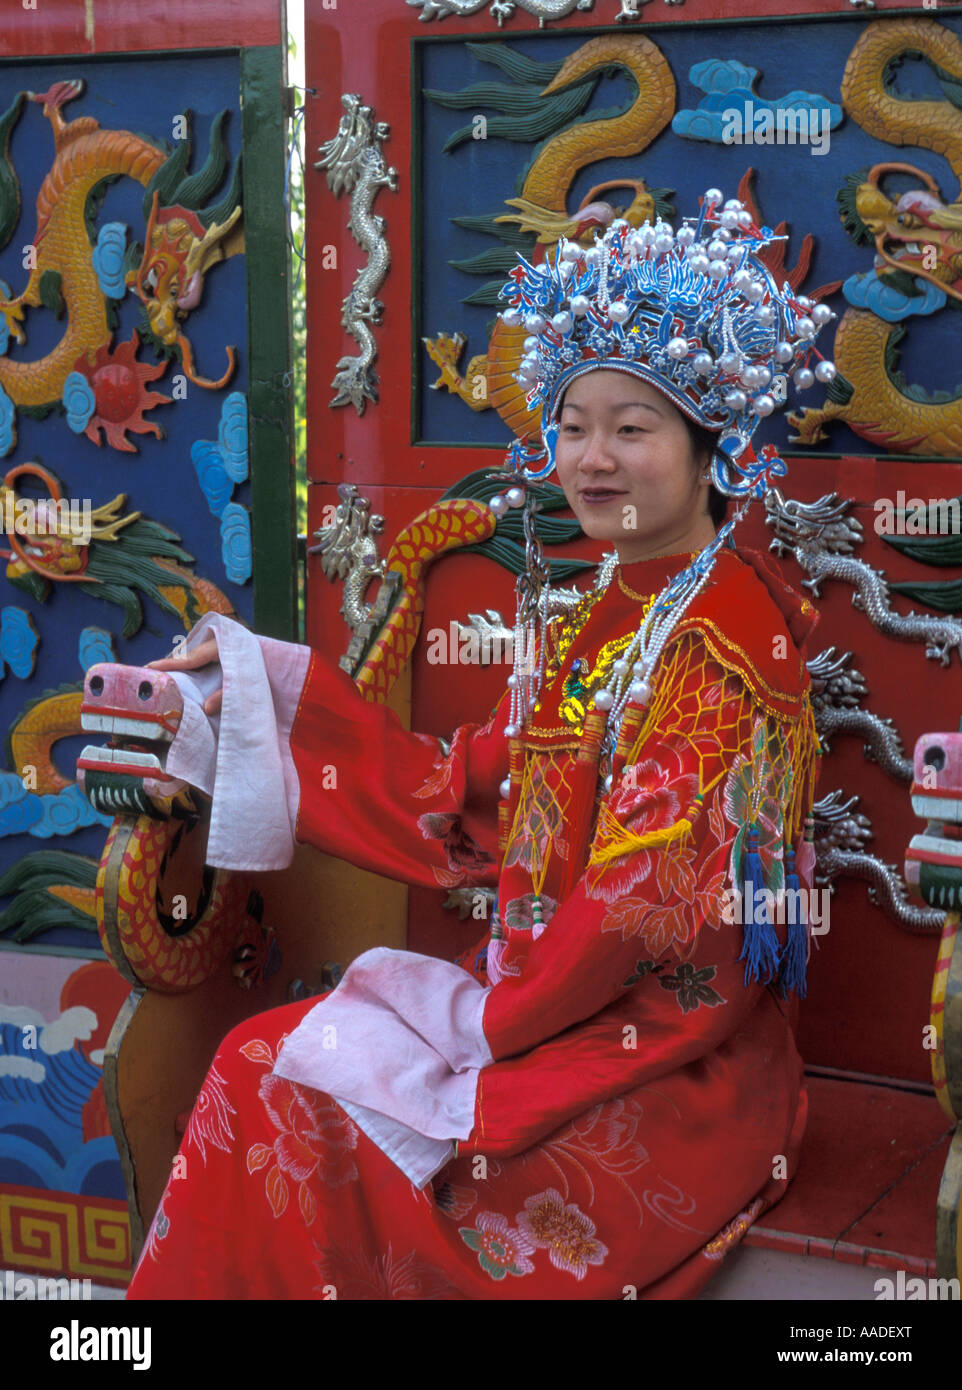 Chinese woman dressed as a member of the Royal Court Bejing China 2001 Stock Photo